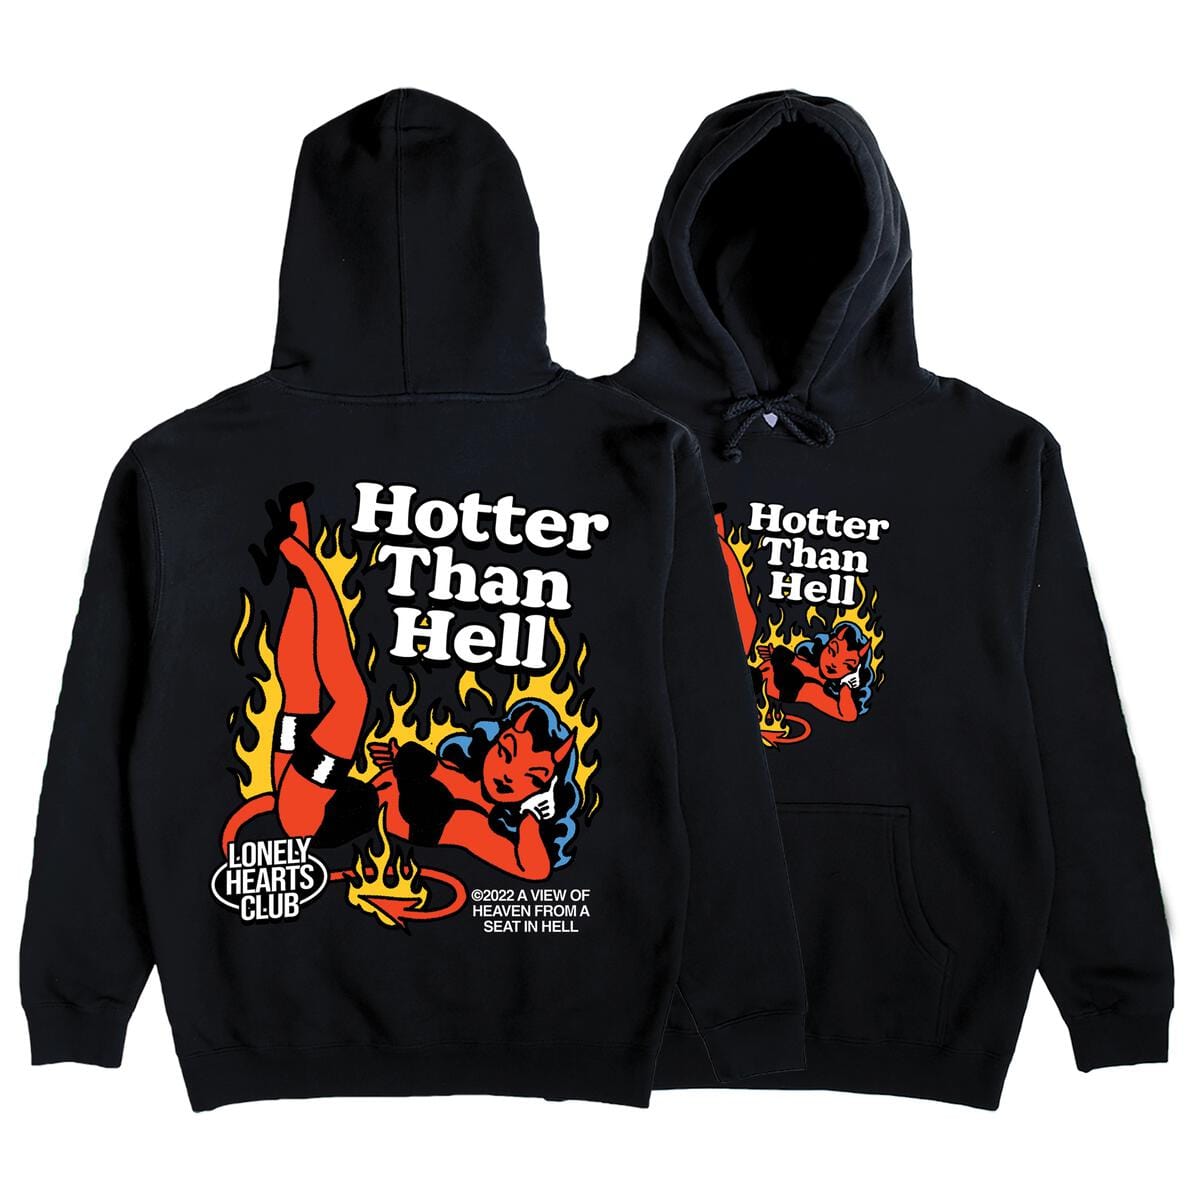 LONLY HEARTS T SHIRT S / black Black Hotter than Hell Hoodie